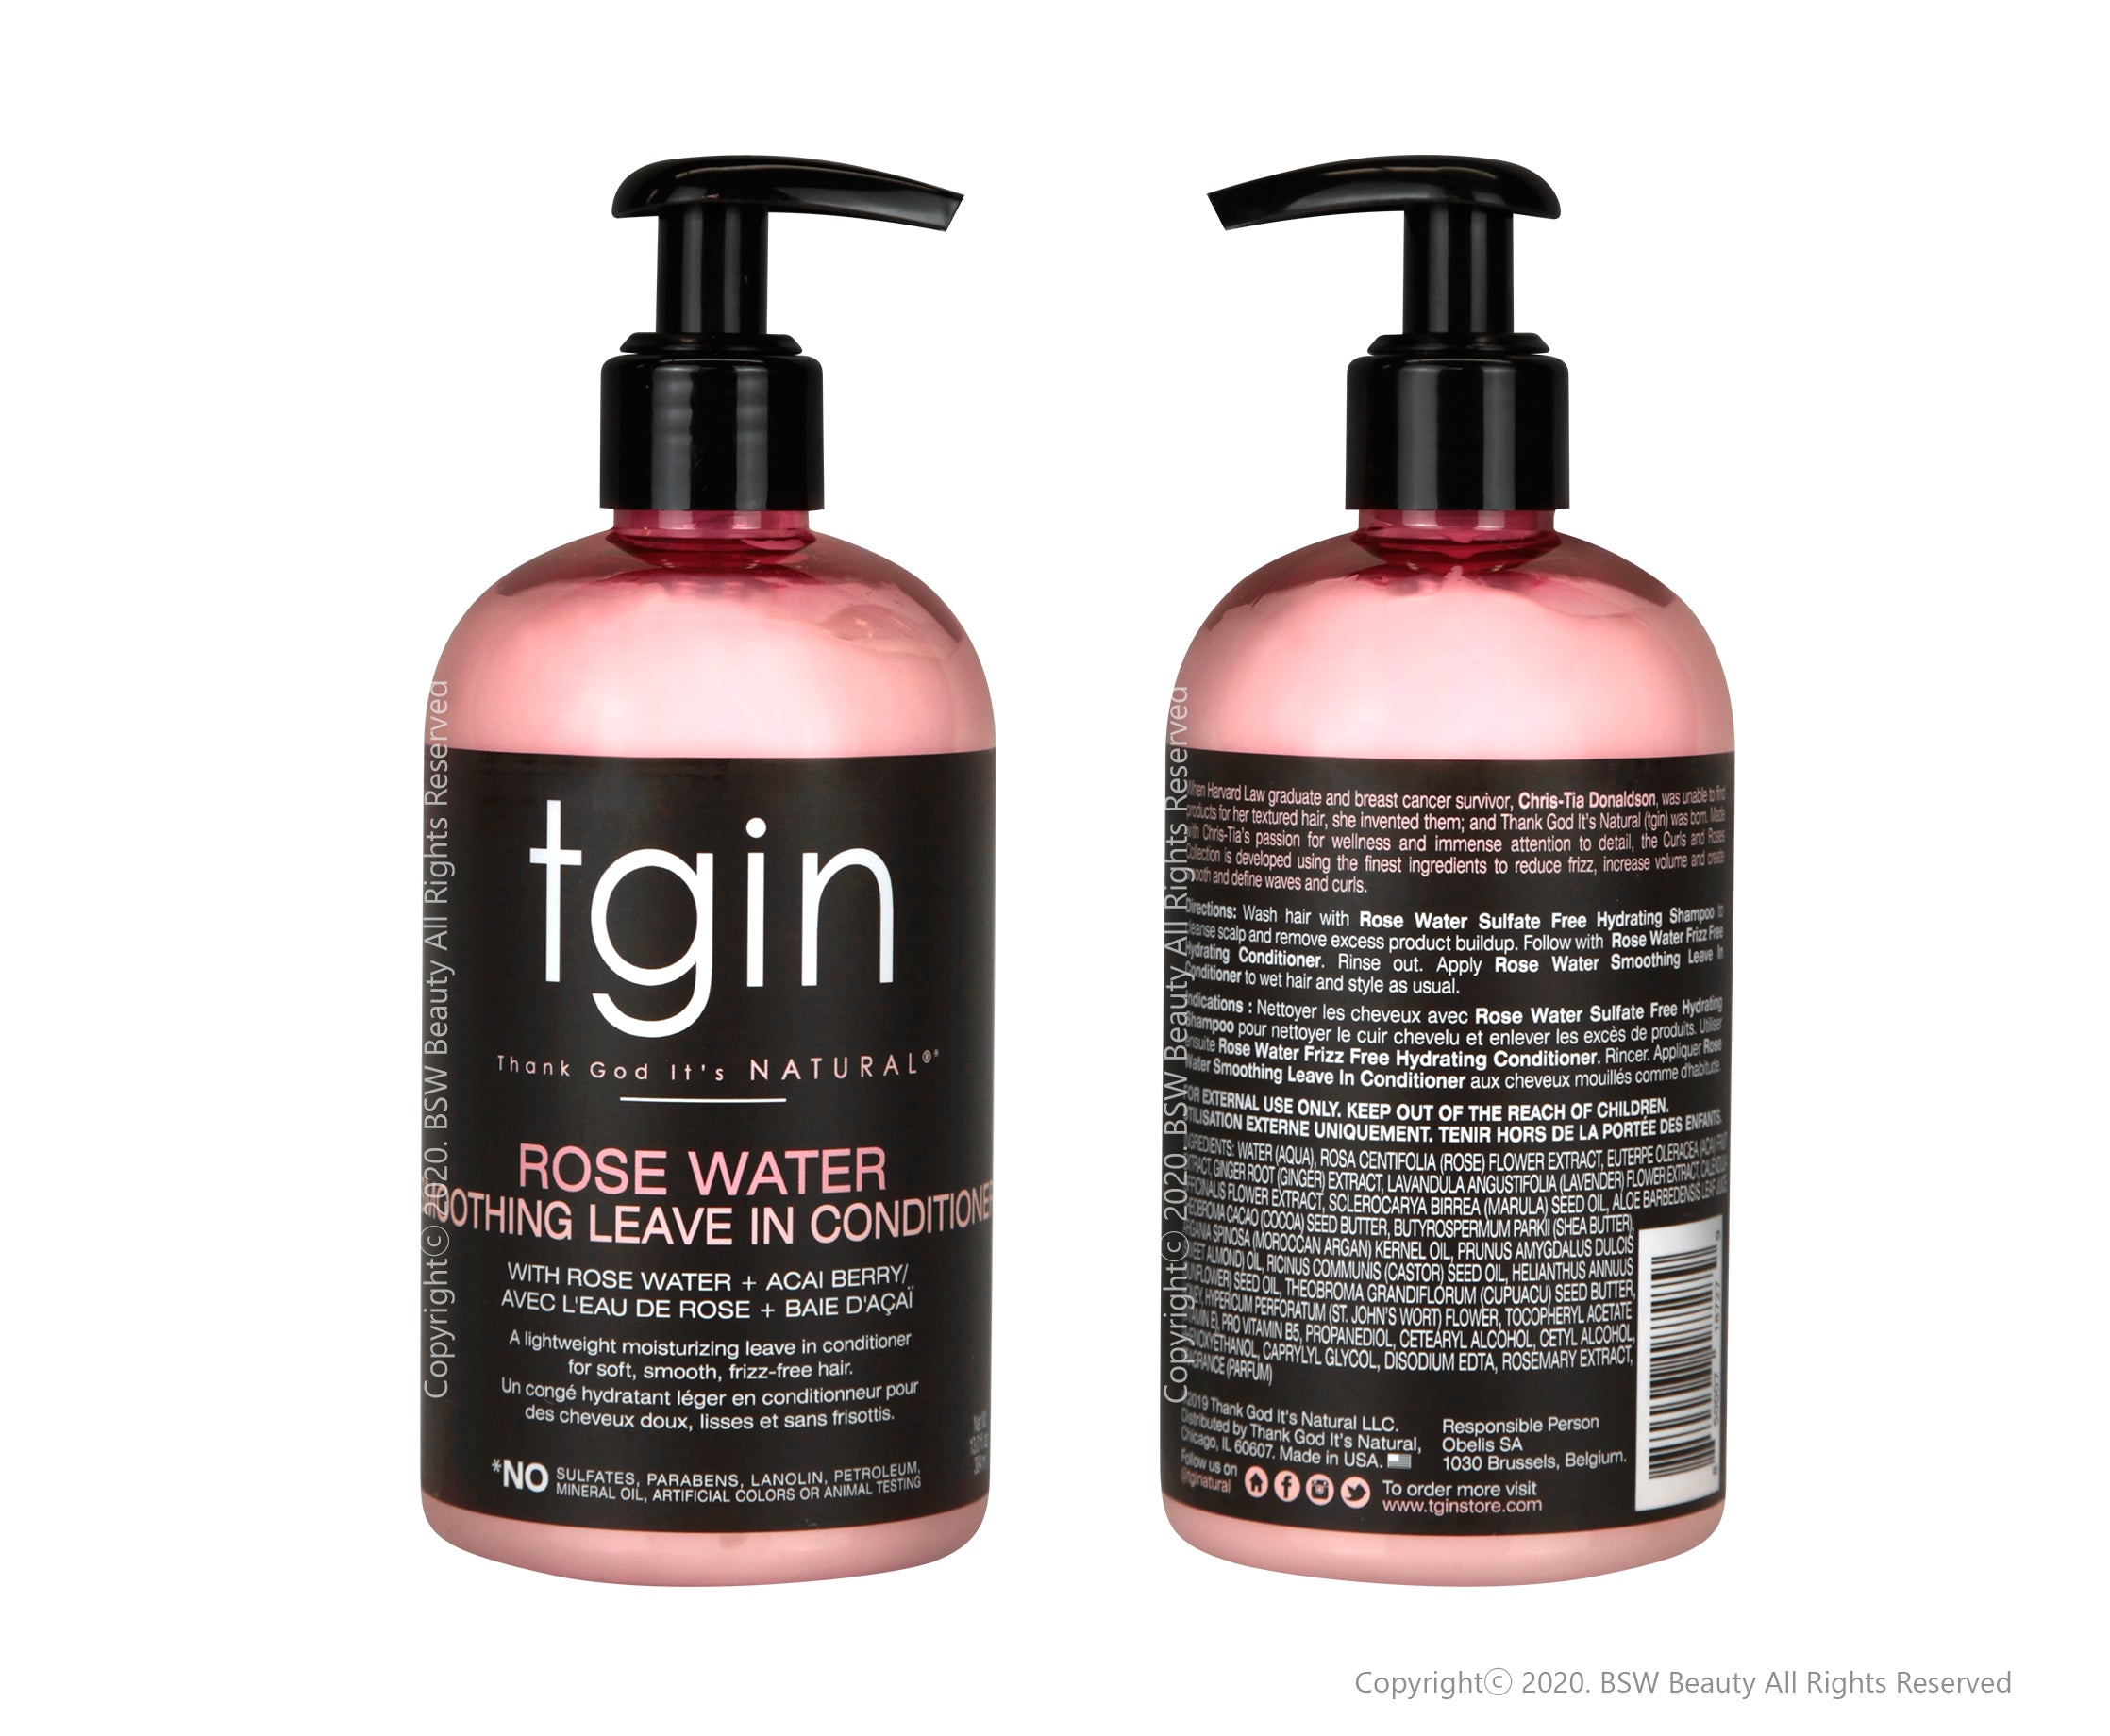 TGIN ROSE WATER SMOOTHING LEAVE IN CONDITIONER 13oz